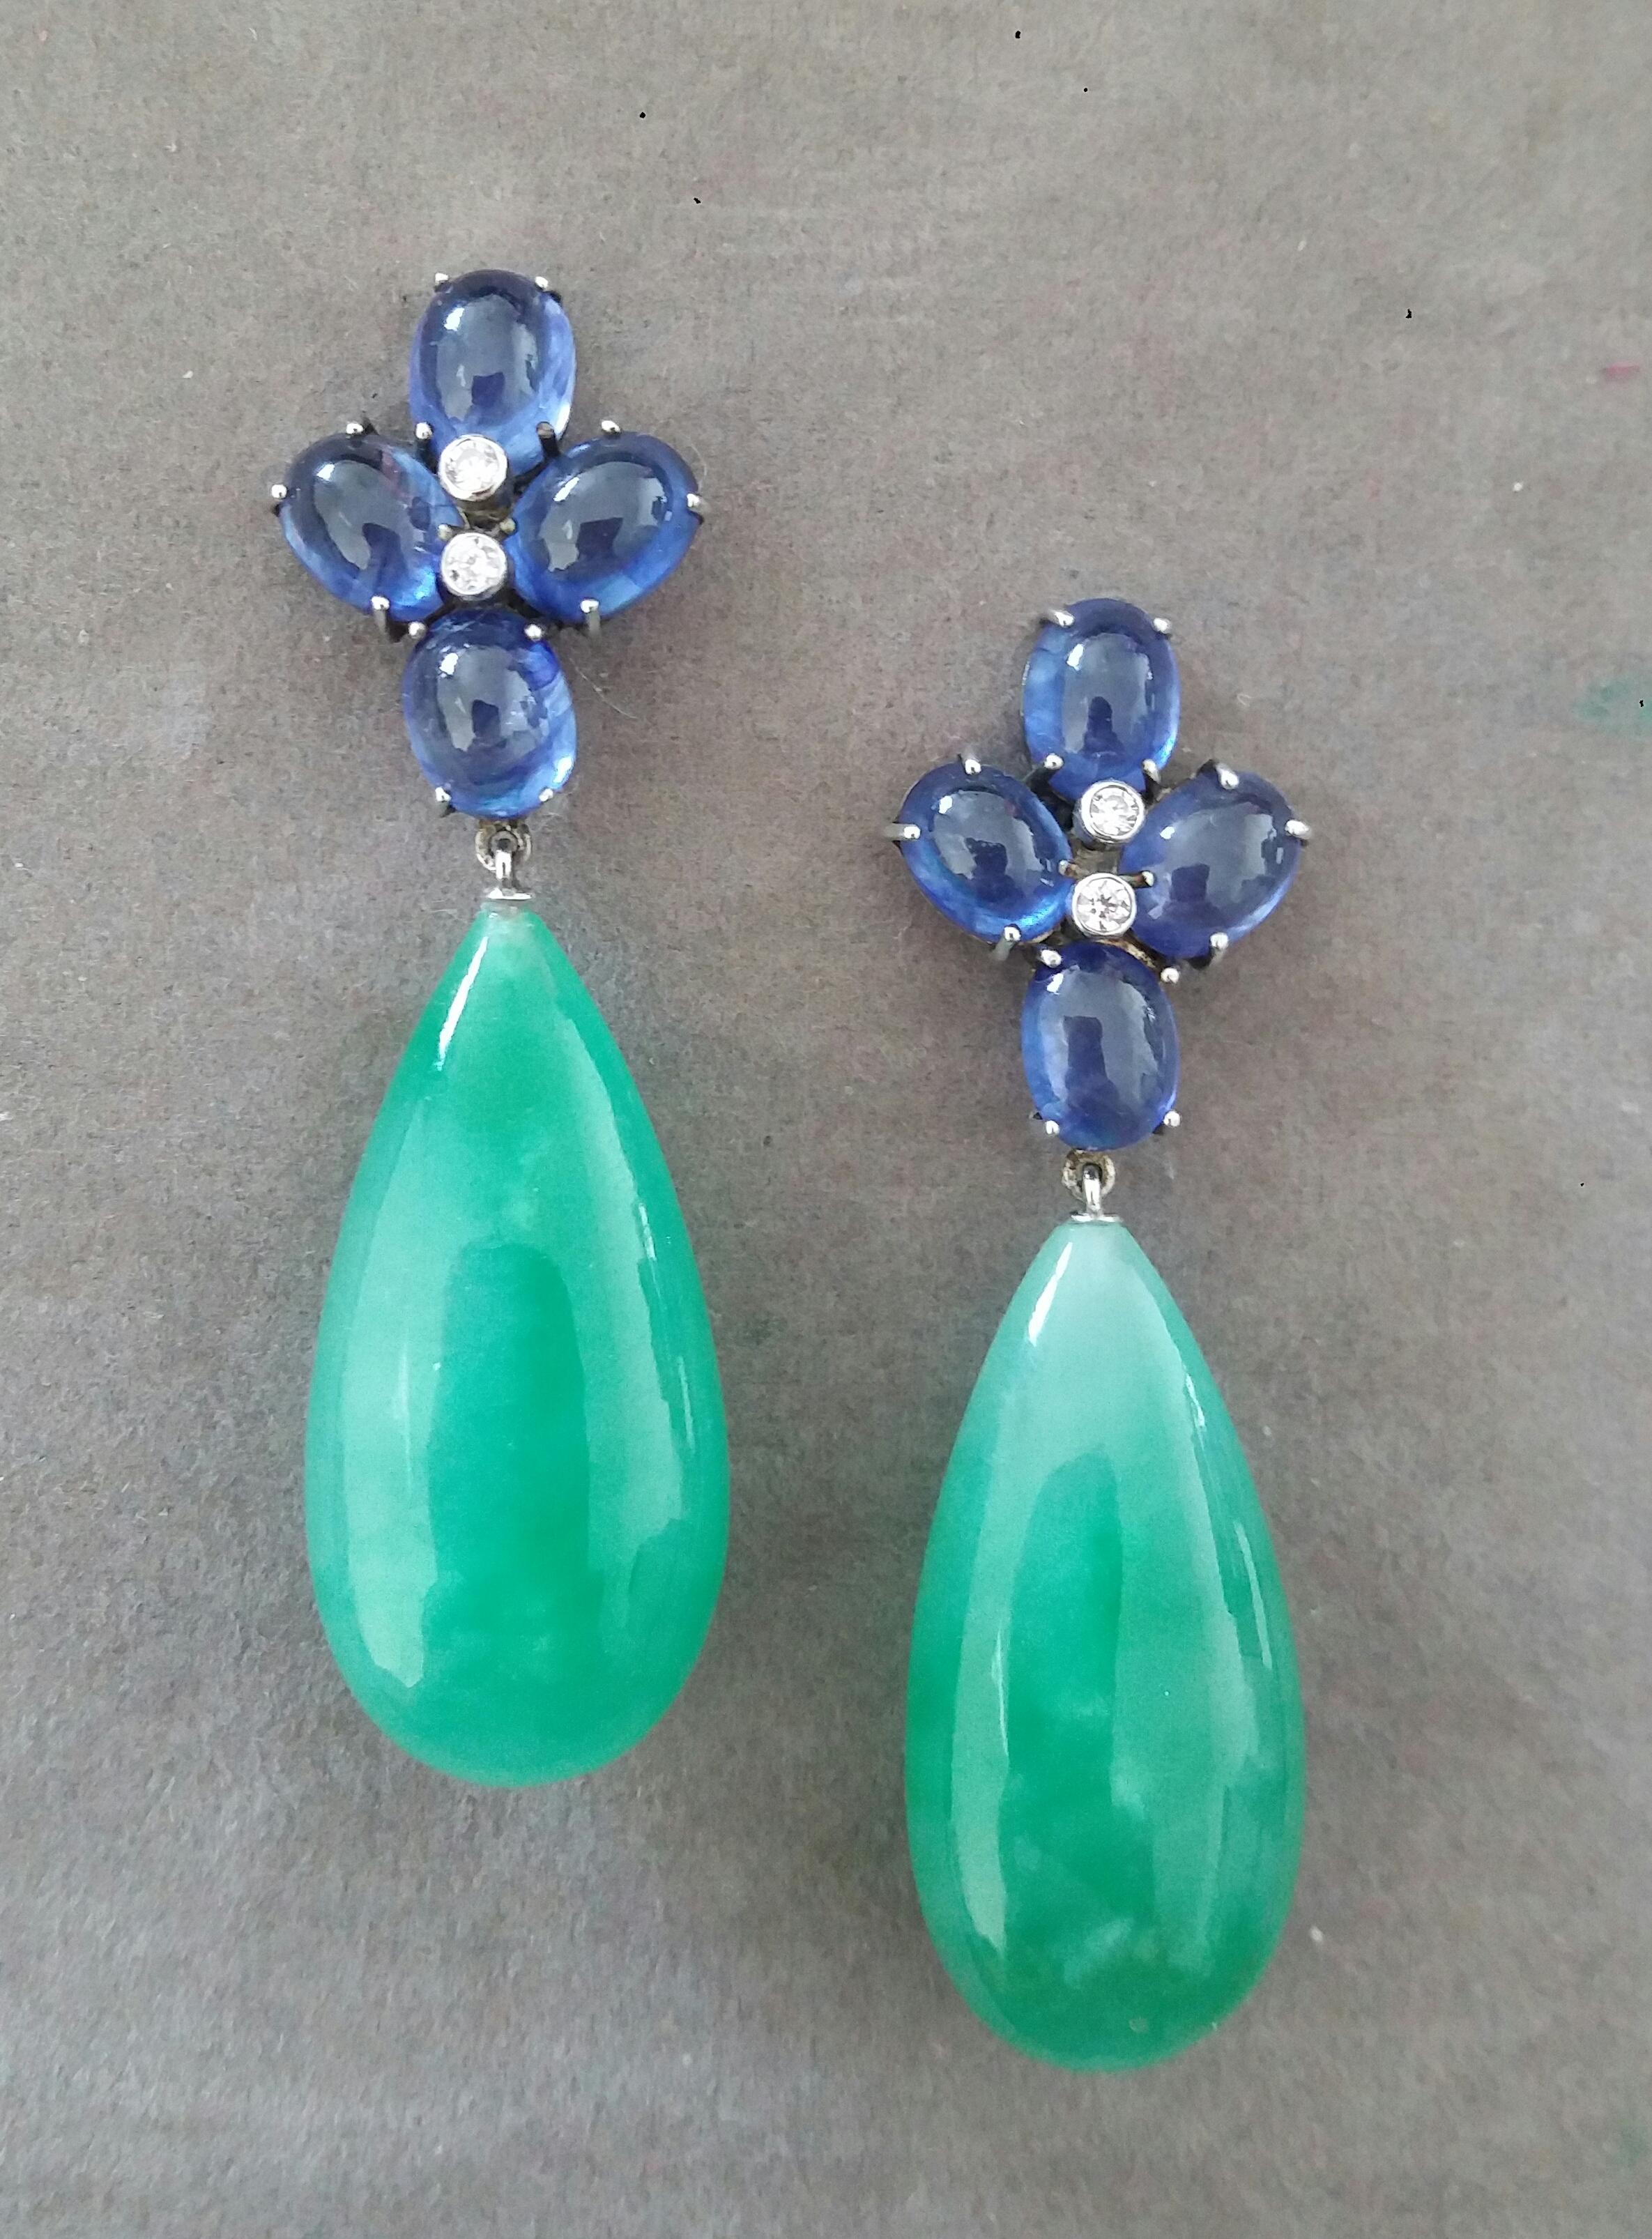 Elegant and completely handmade Earrings consisting of an upper part of 4 oval shape Blue Sapphires 6x8 mm  and weighing 20 Carats set together in 14 Kt white gold with 2 small diamonds in the center, at the bottom we have 2 Pear Shape Jade Drops